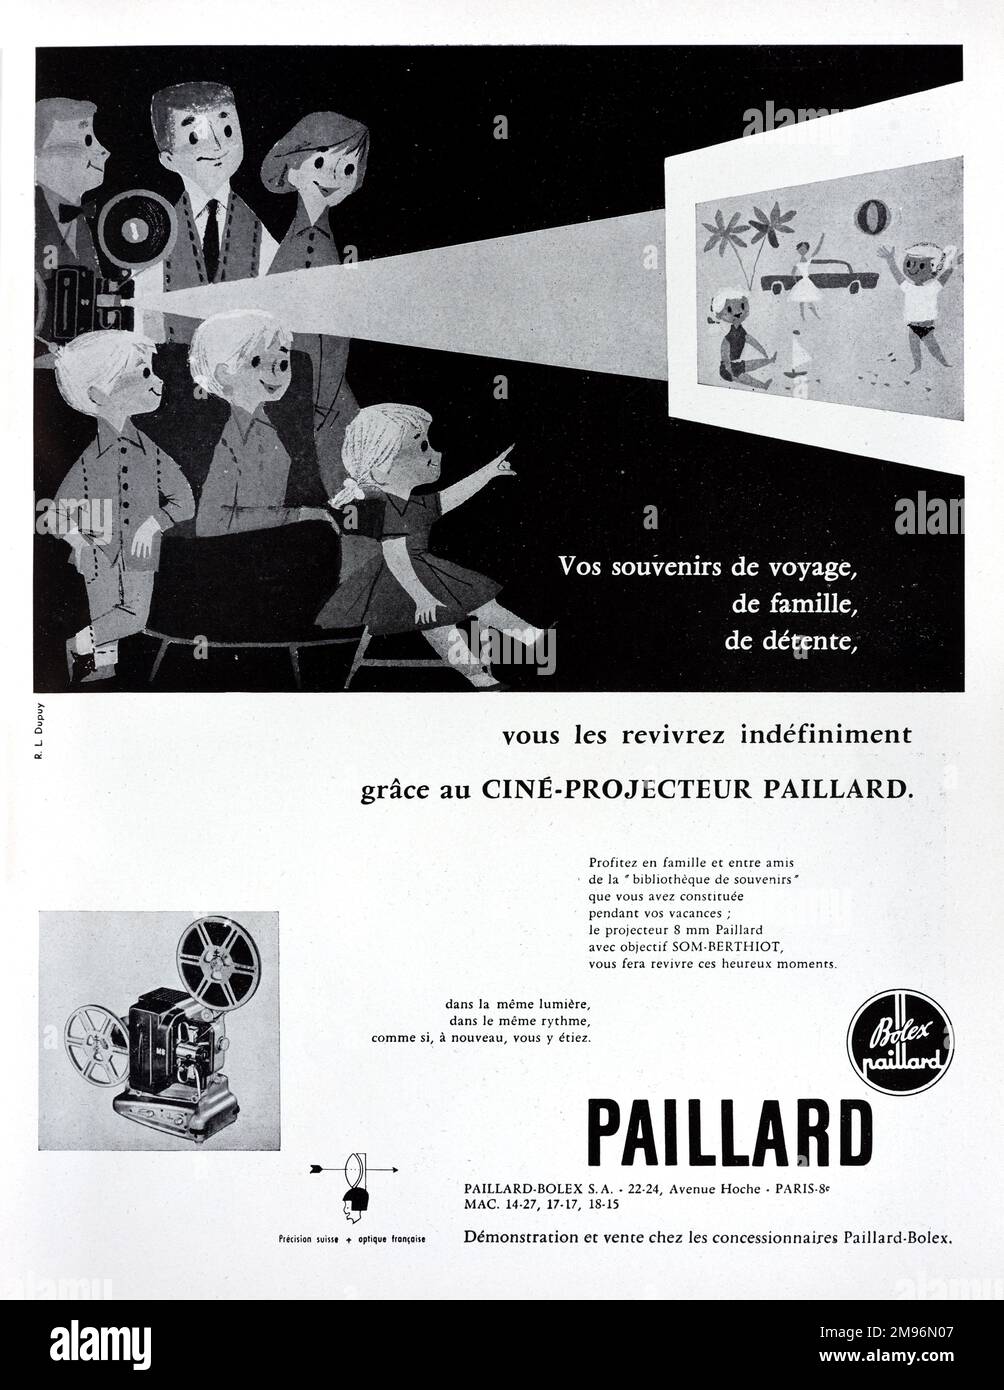 Vintage or Old Advert, Advertisement, Publicity or Illustration for Paillard Film Projector 1957. Illustrated with image of 1950s family entertainment, home entertainment or amateur film show of holiday photographs or film. Stock Photo